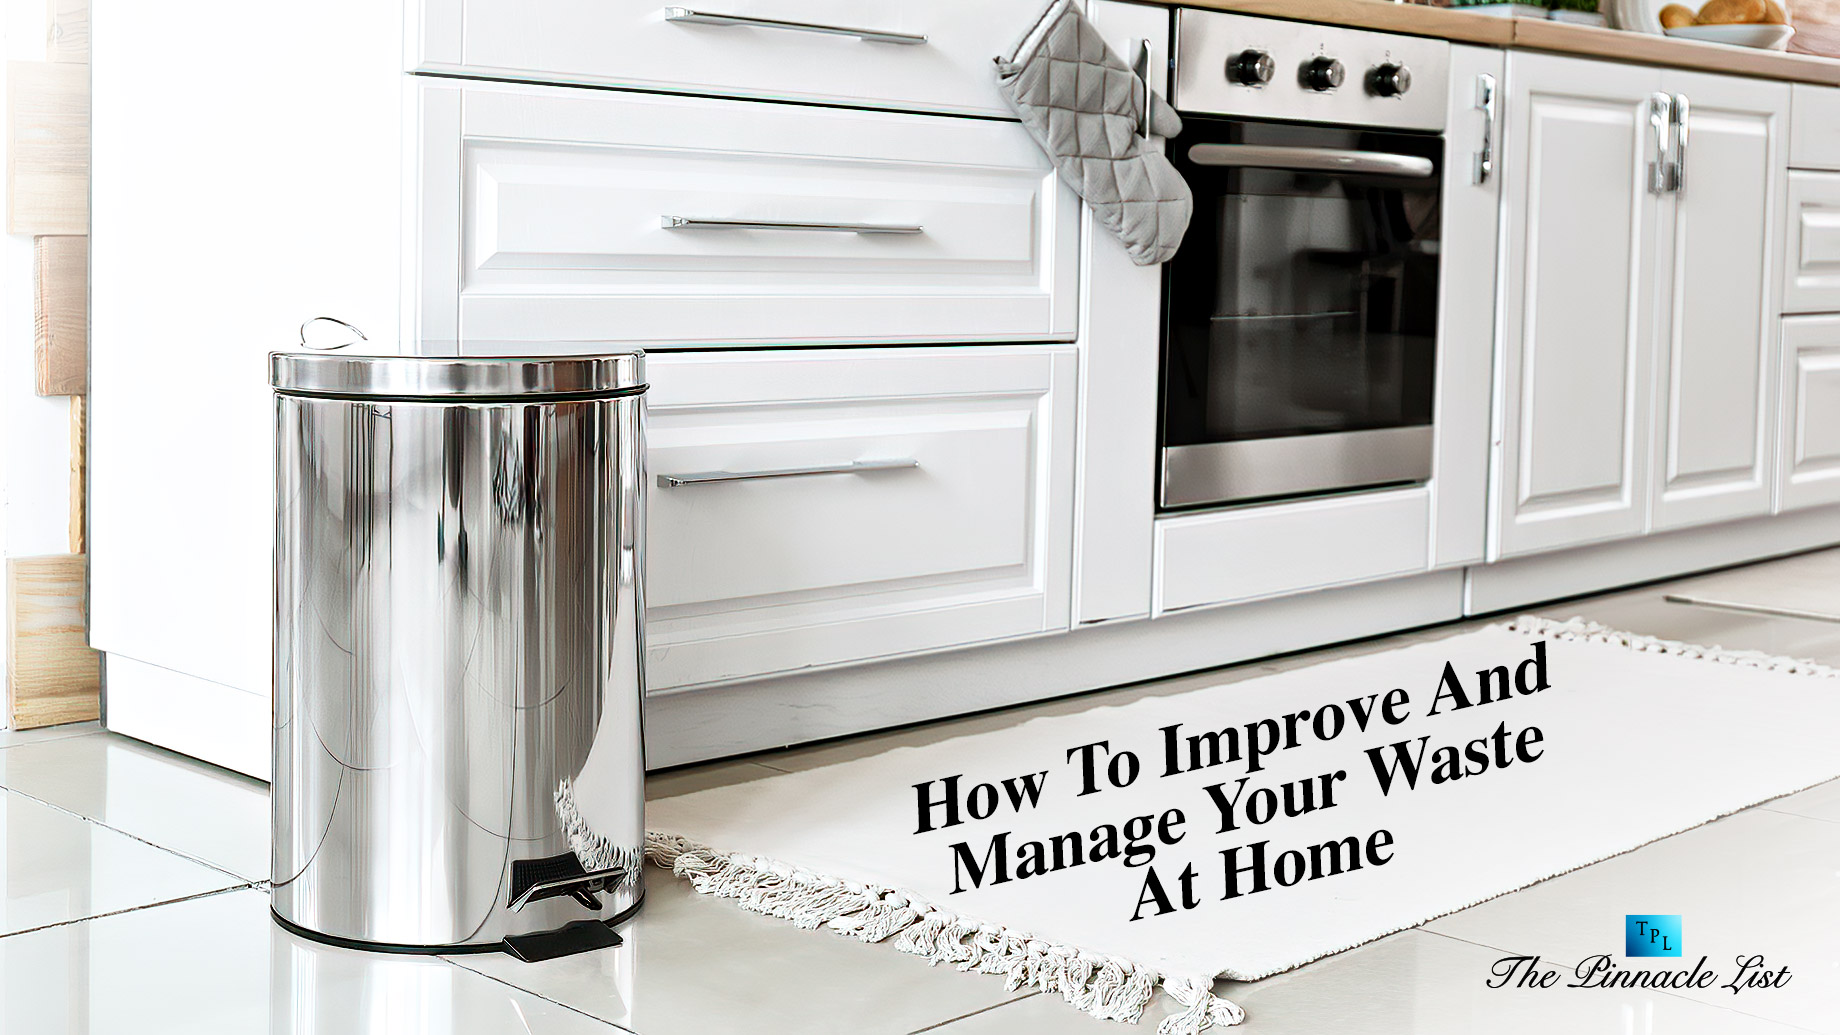 How To Improve And Manage Your Waste At Home